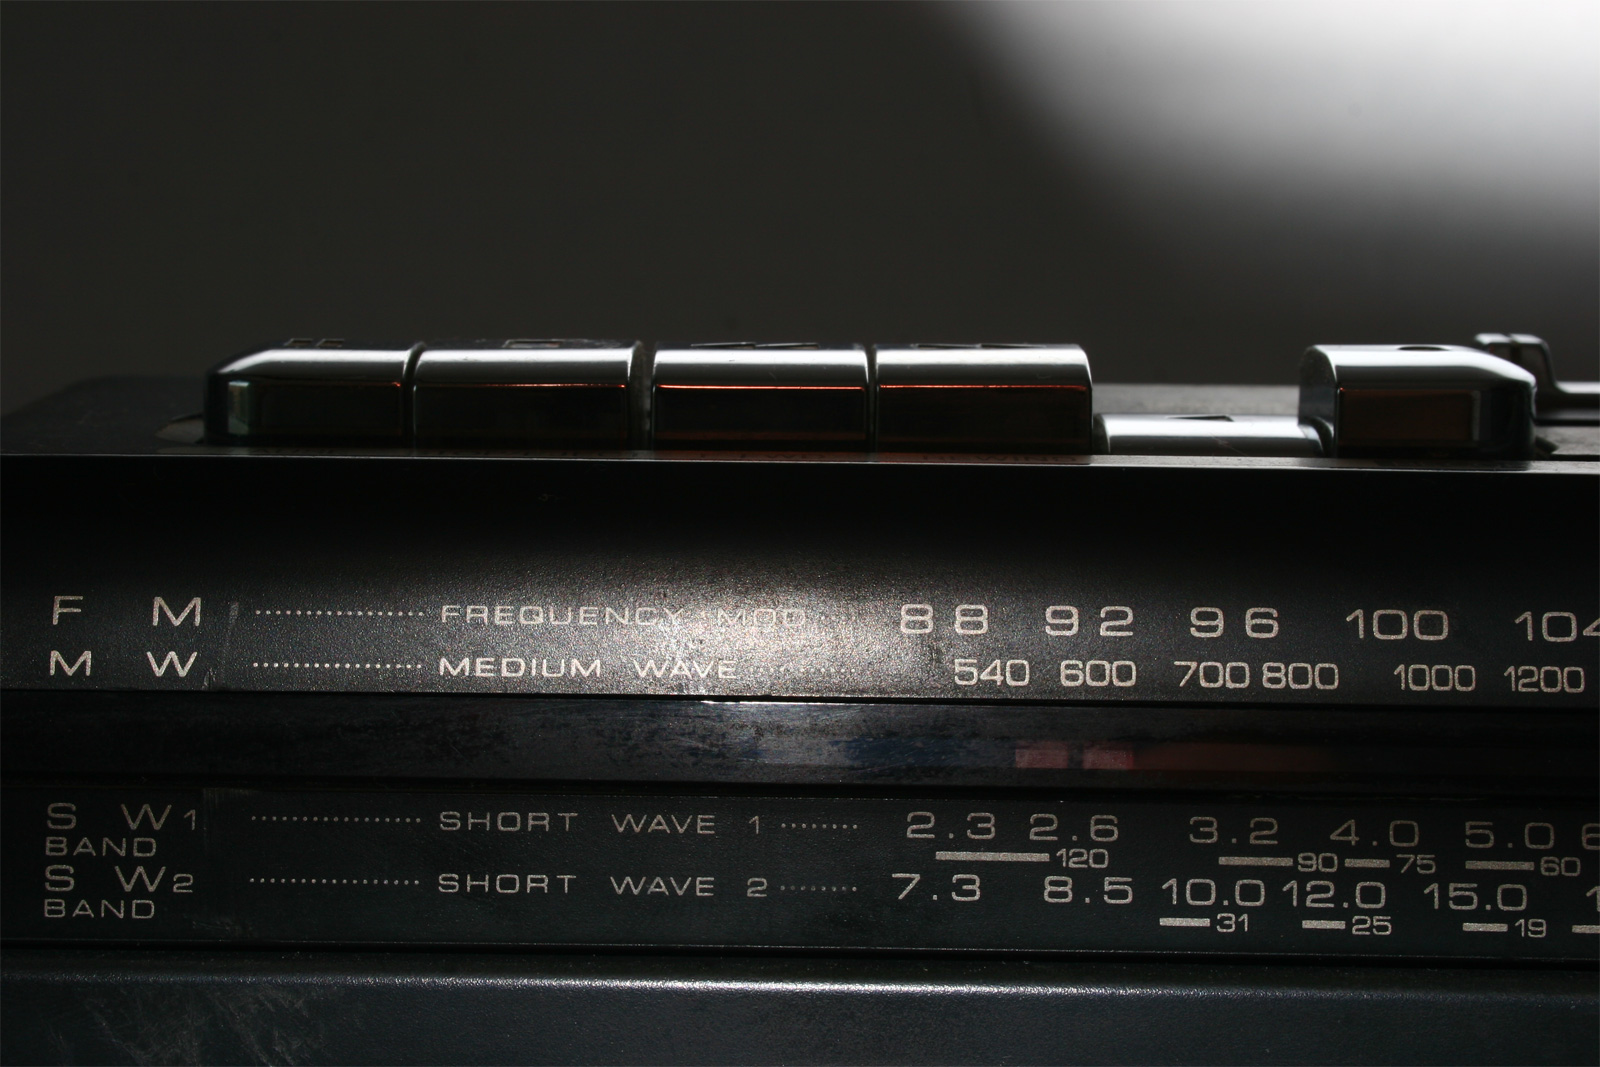 Radio scale of an old cassette player